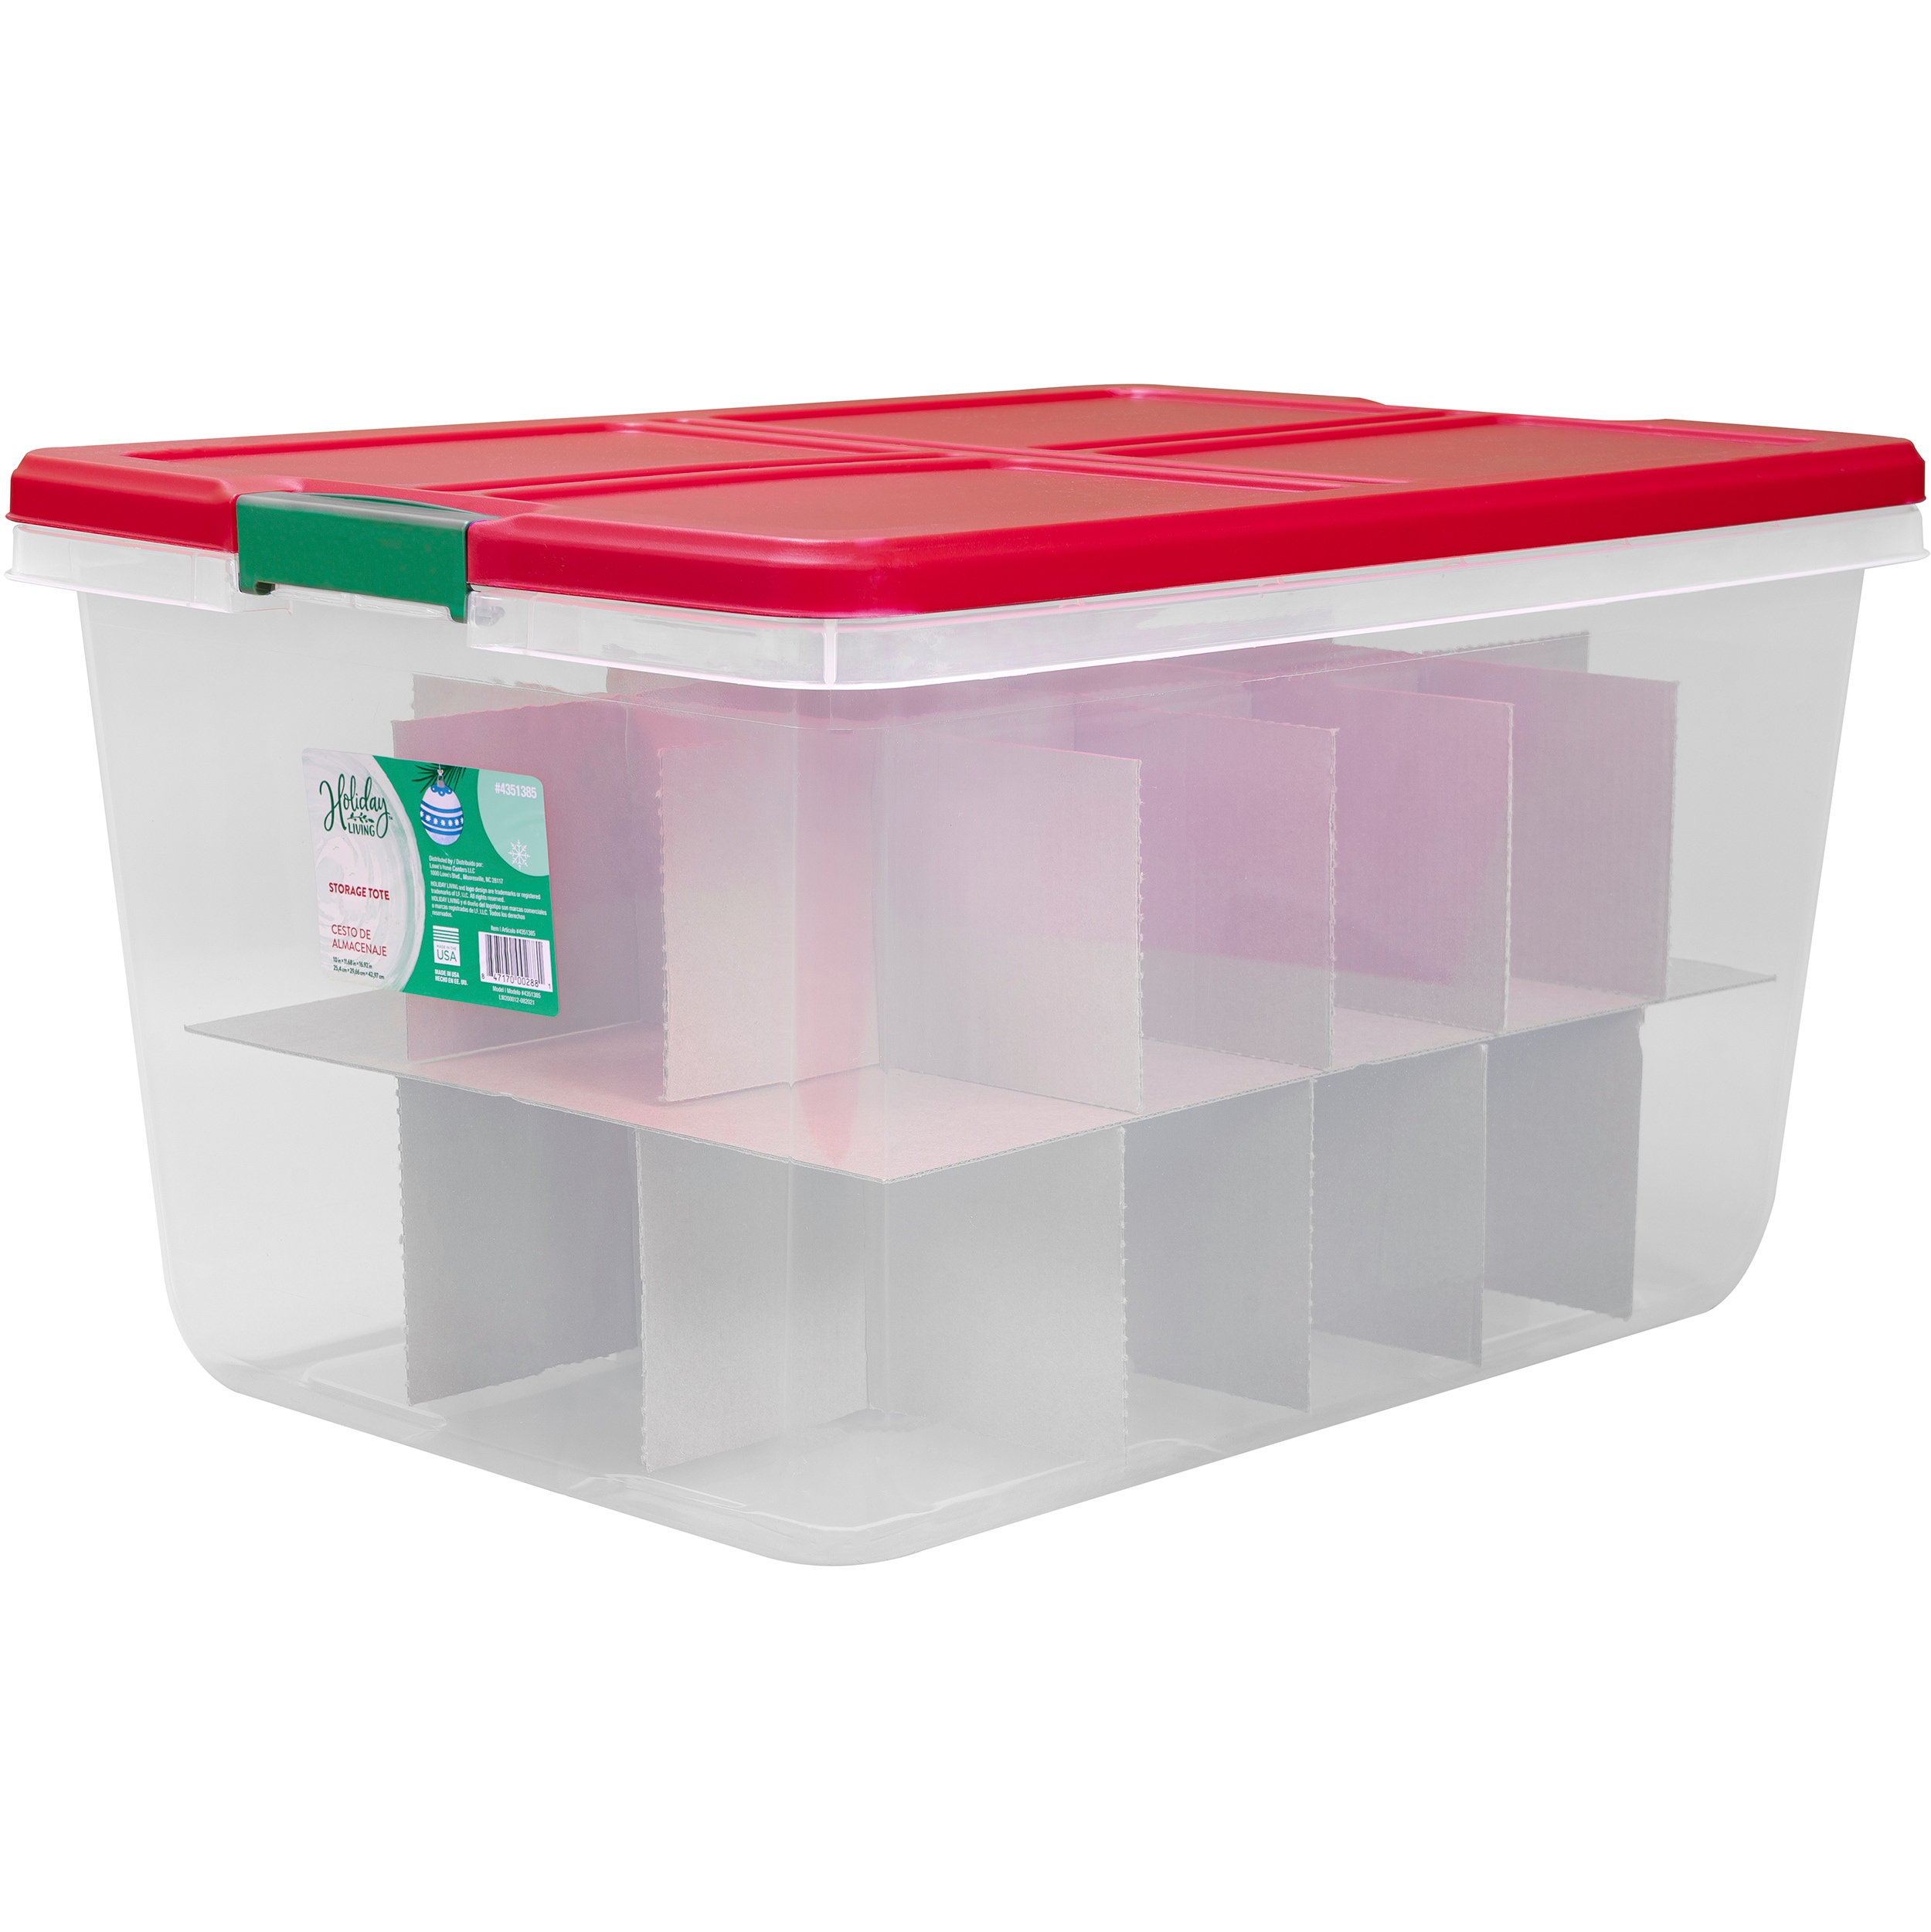 Holiday Round Christmas Storage Container 6 Pc Set - Assorted by